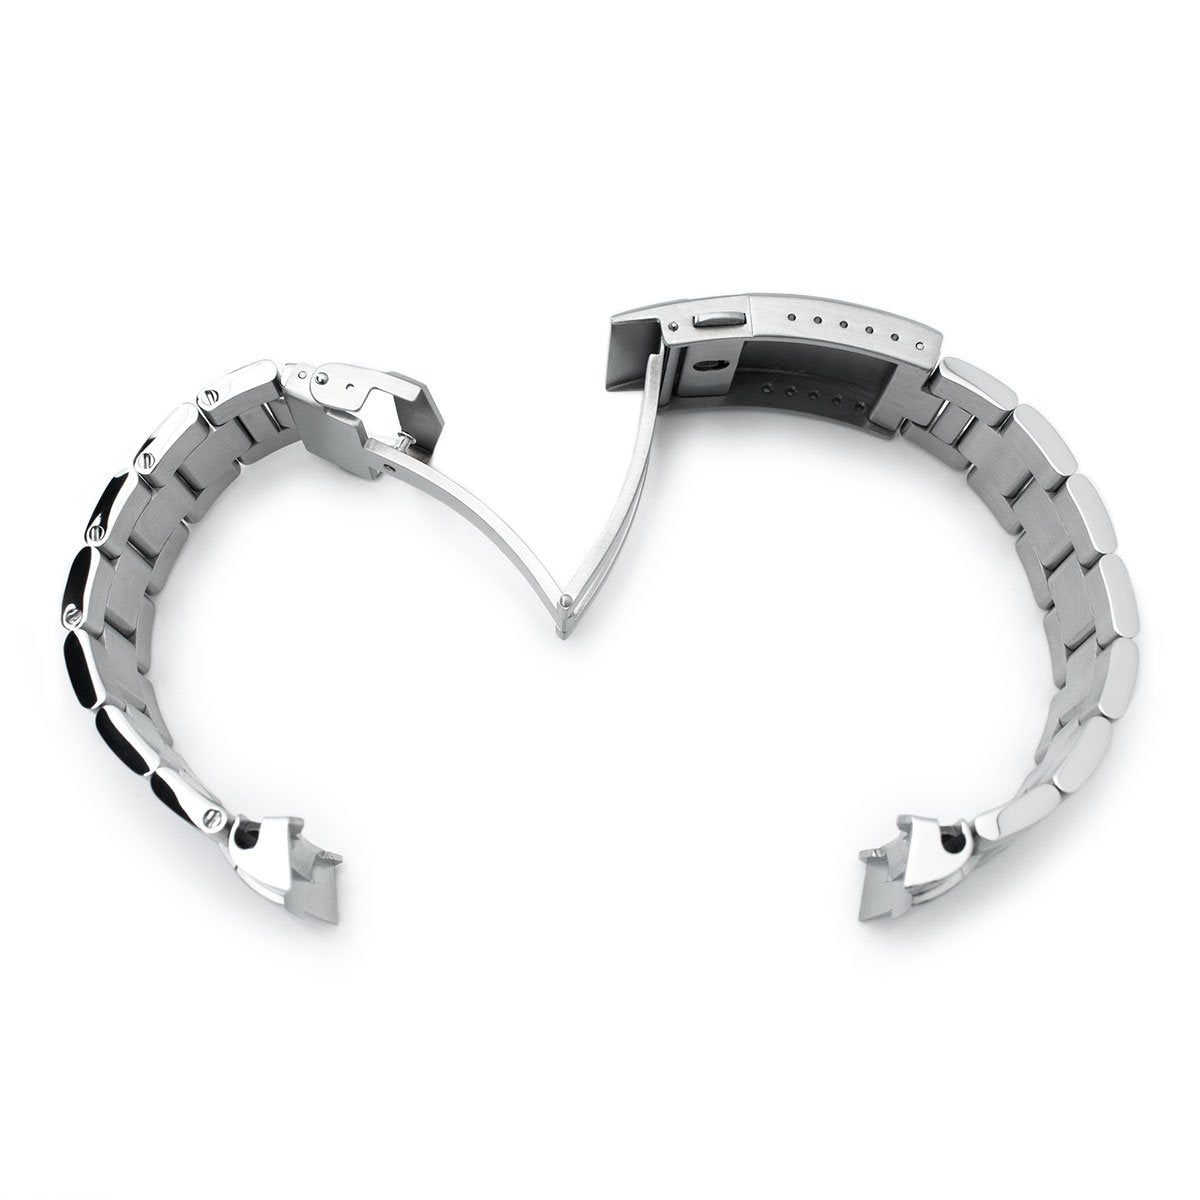 Stainless Steel Bracelet Diver Clasp Double Lock Buckle